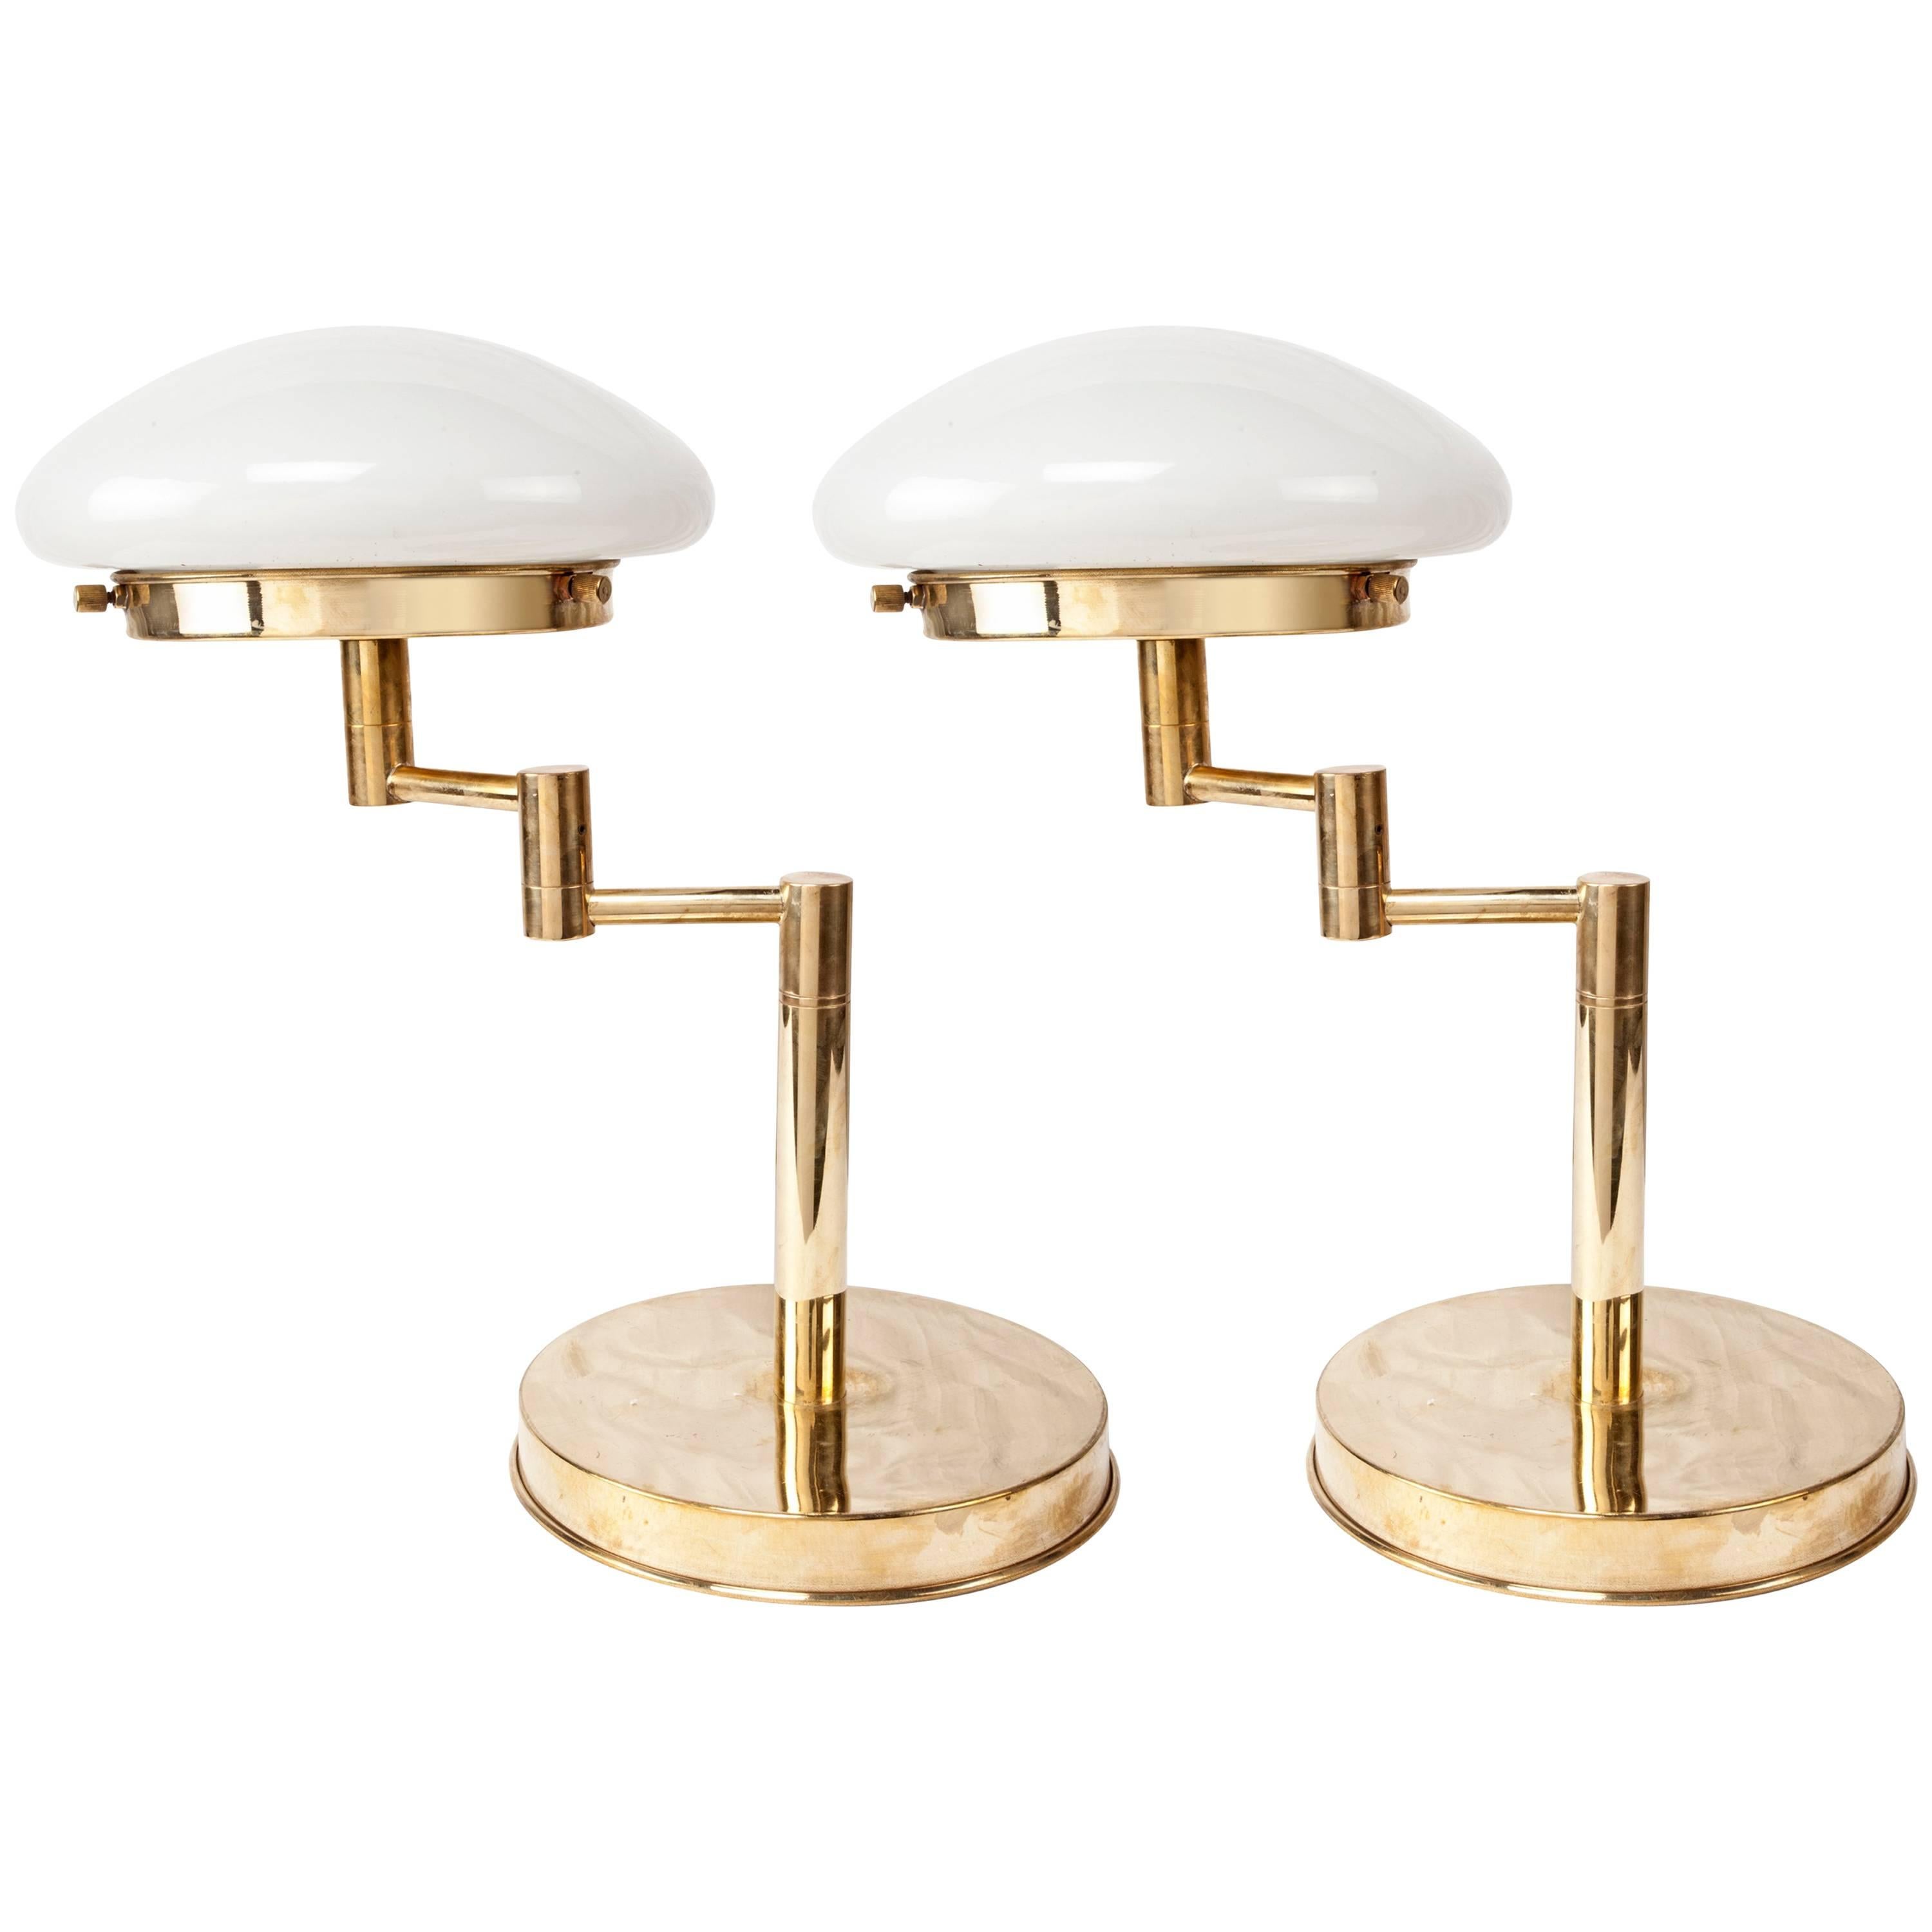 Pair of Mid-Century Modern Swing-Arm Brass Table Lamps with Milk Glass Shades